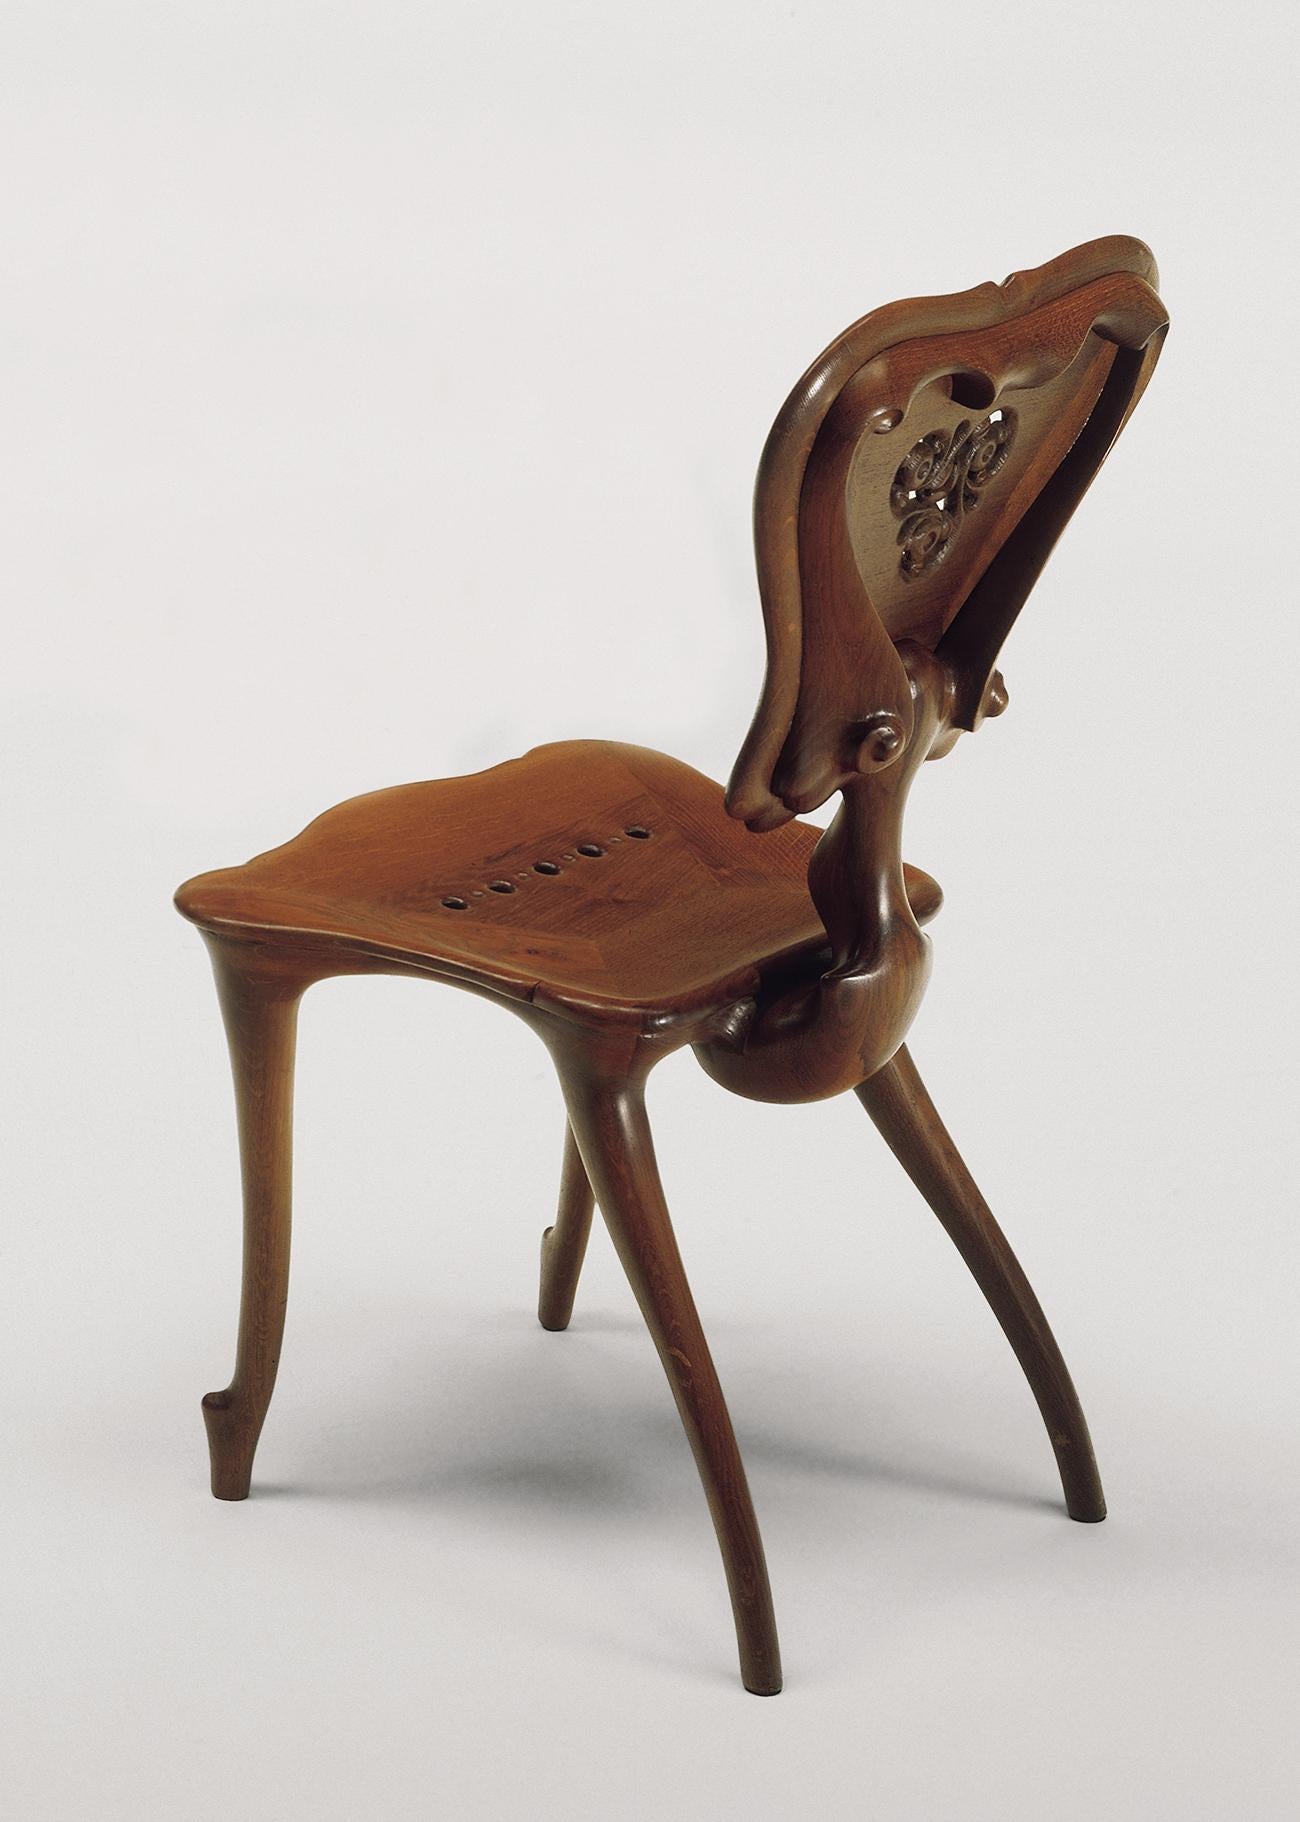 Calvet armchair, Antonio Gaudí
1902
Dimensions: 54 x 52 x 94 cm
Materials: Dark varnished oak

Solid dark varnished oak

Antoni Gaudí (1852/1926) is, without doubt, the most internationally well-known Spanish architect. But is not only his